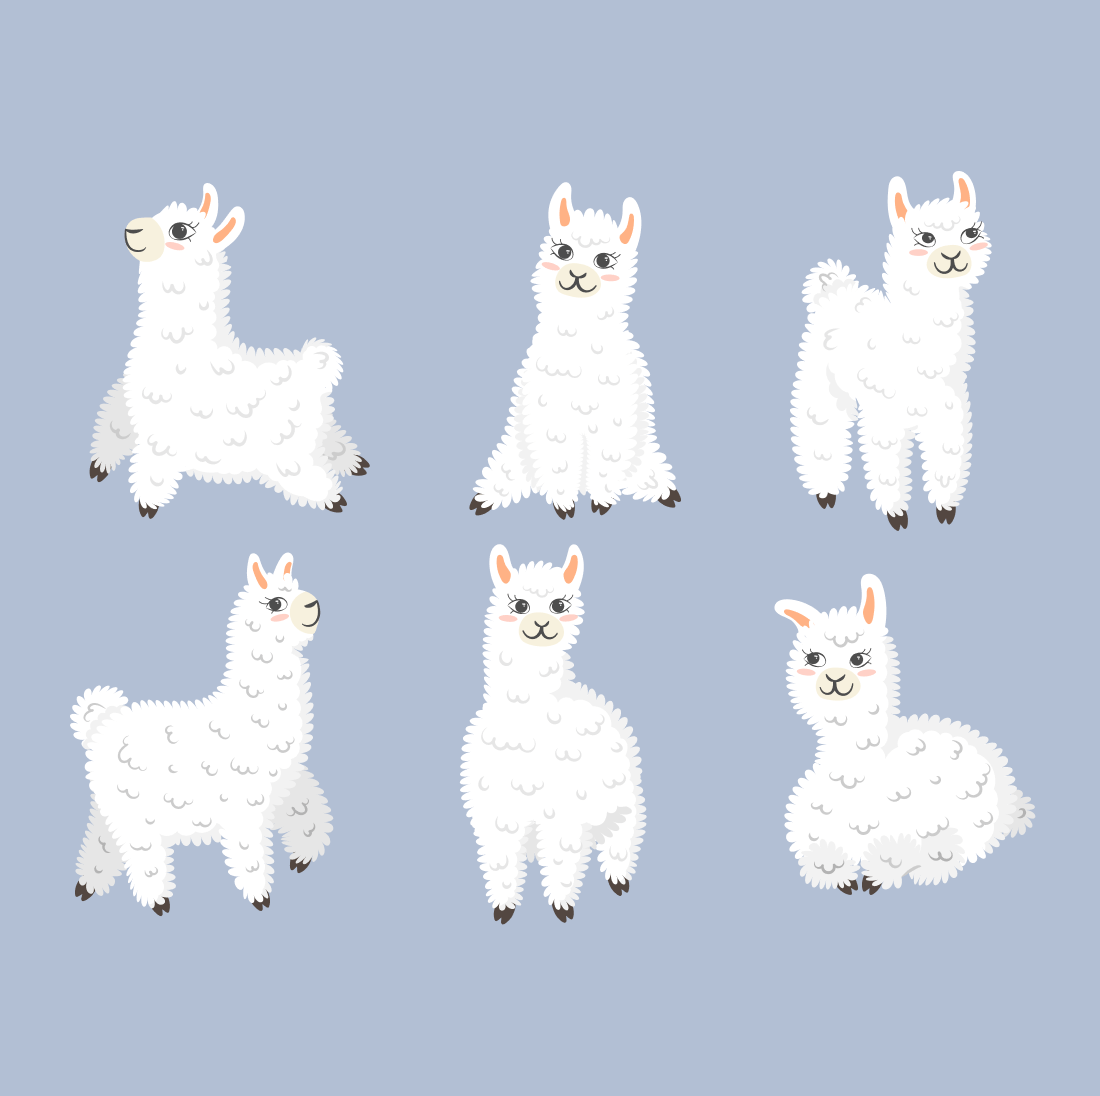 Group of white llamas on a blue background.